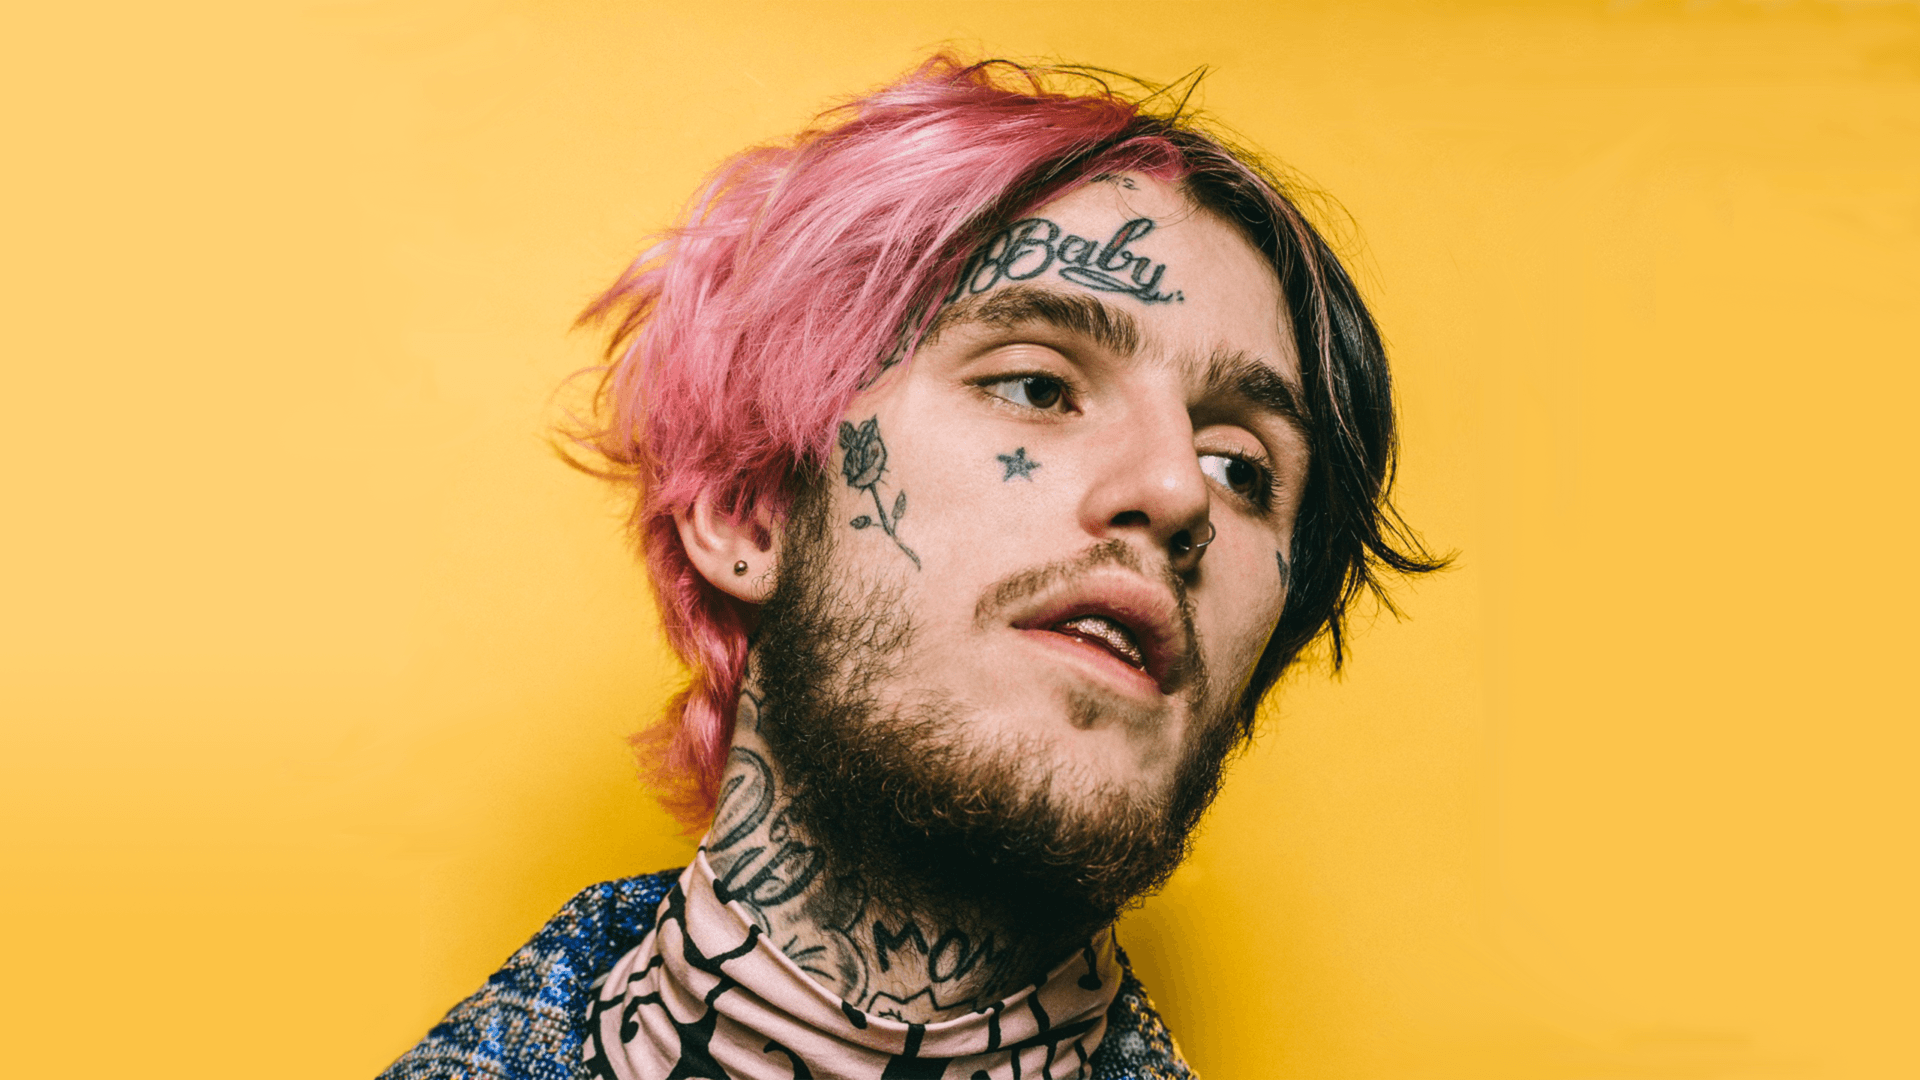 4K Ultra HD Lil Peep Wallpaper and Background Image